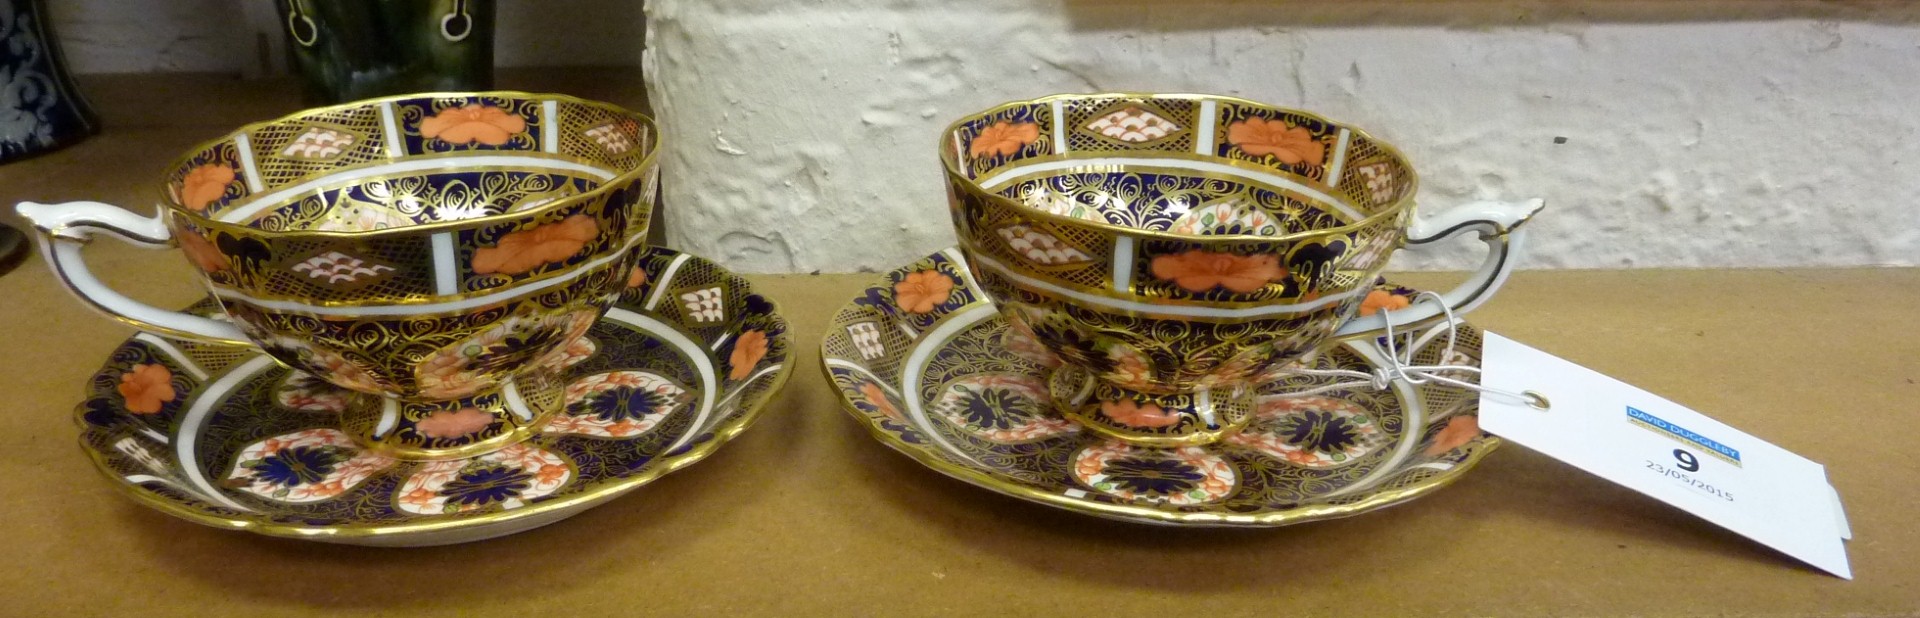 Two Royal Crown Derby cups and saucers - 1128 pattern